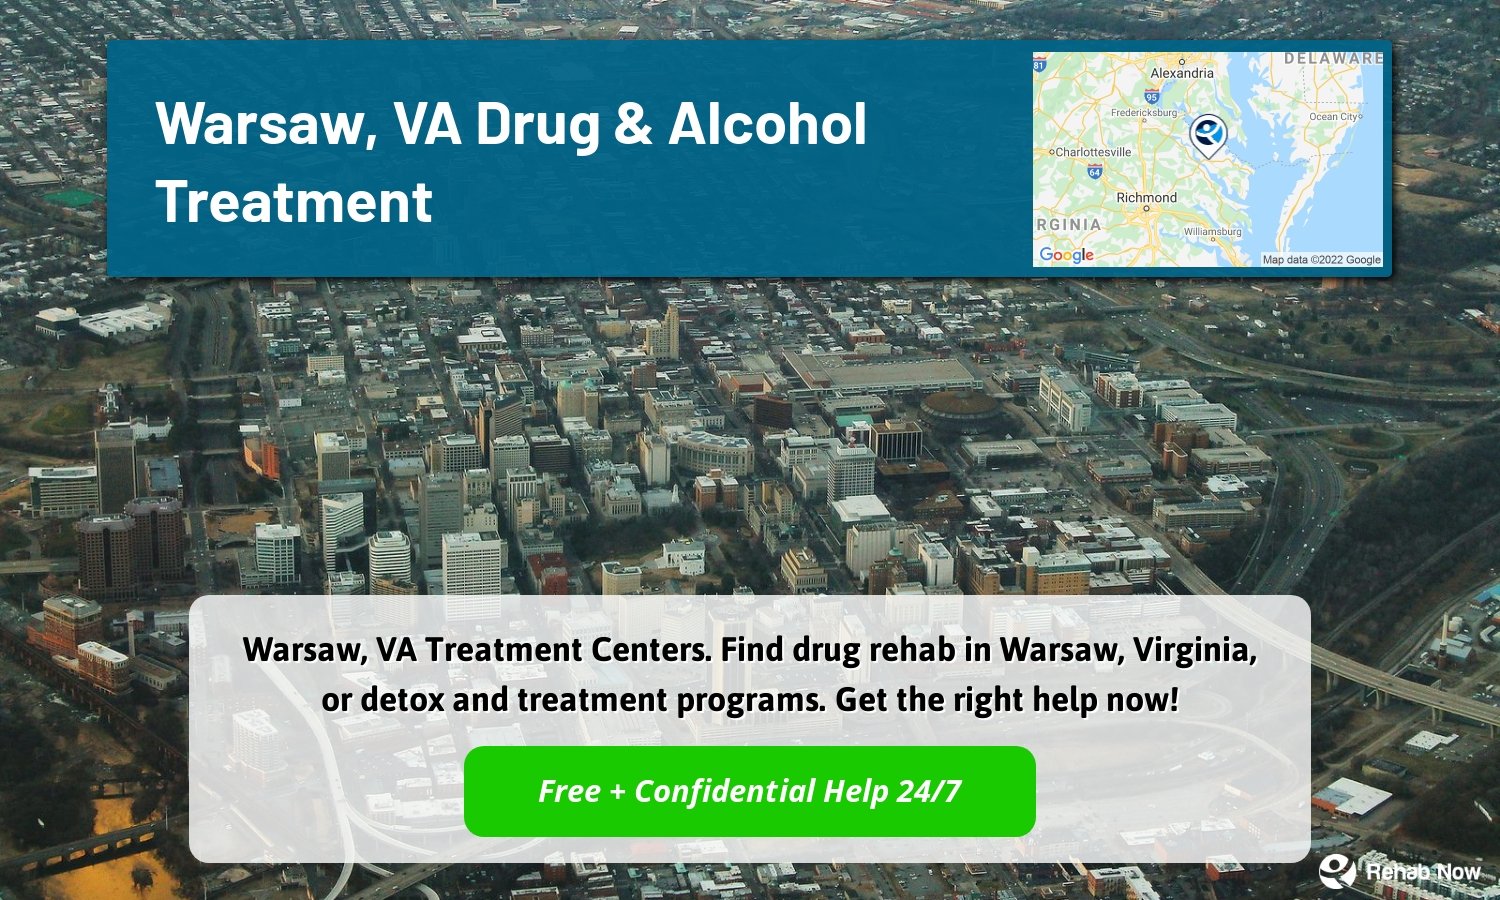 Warsaw, VA Treatment Centers. Find drug rehab in Warsaw, Virginia, or detox and treatment programs. Get the right help now!